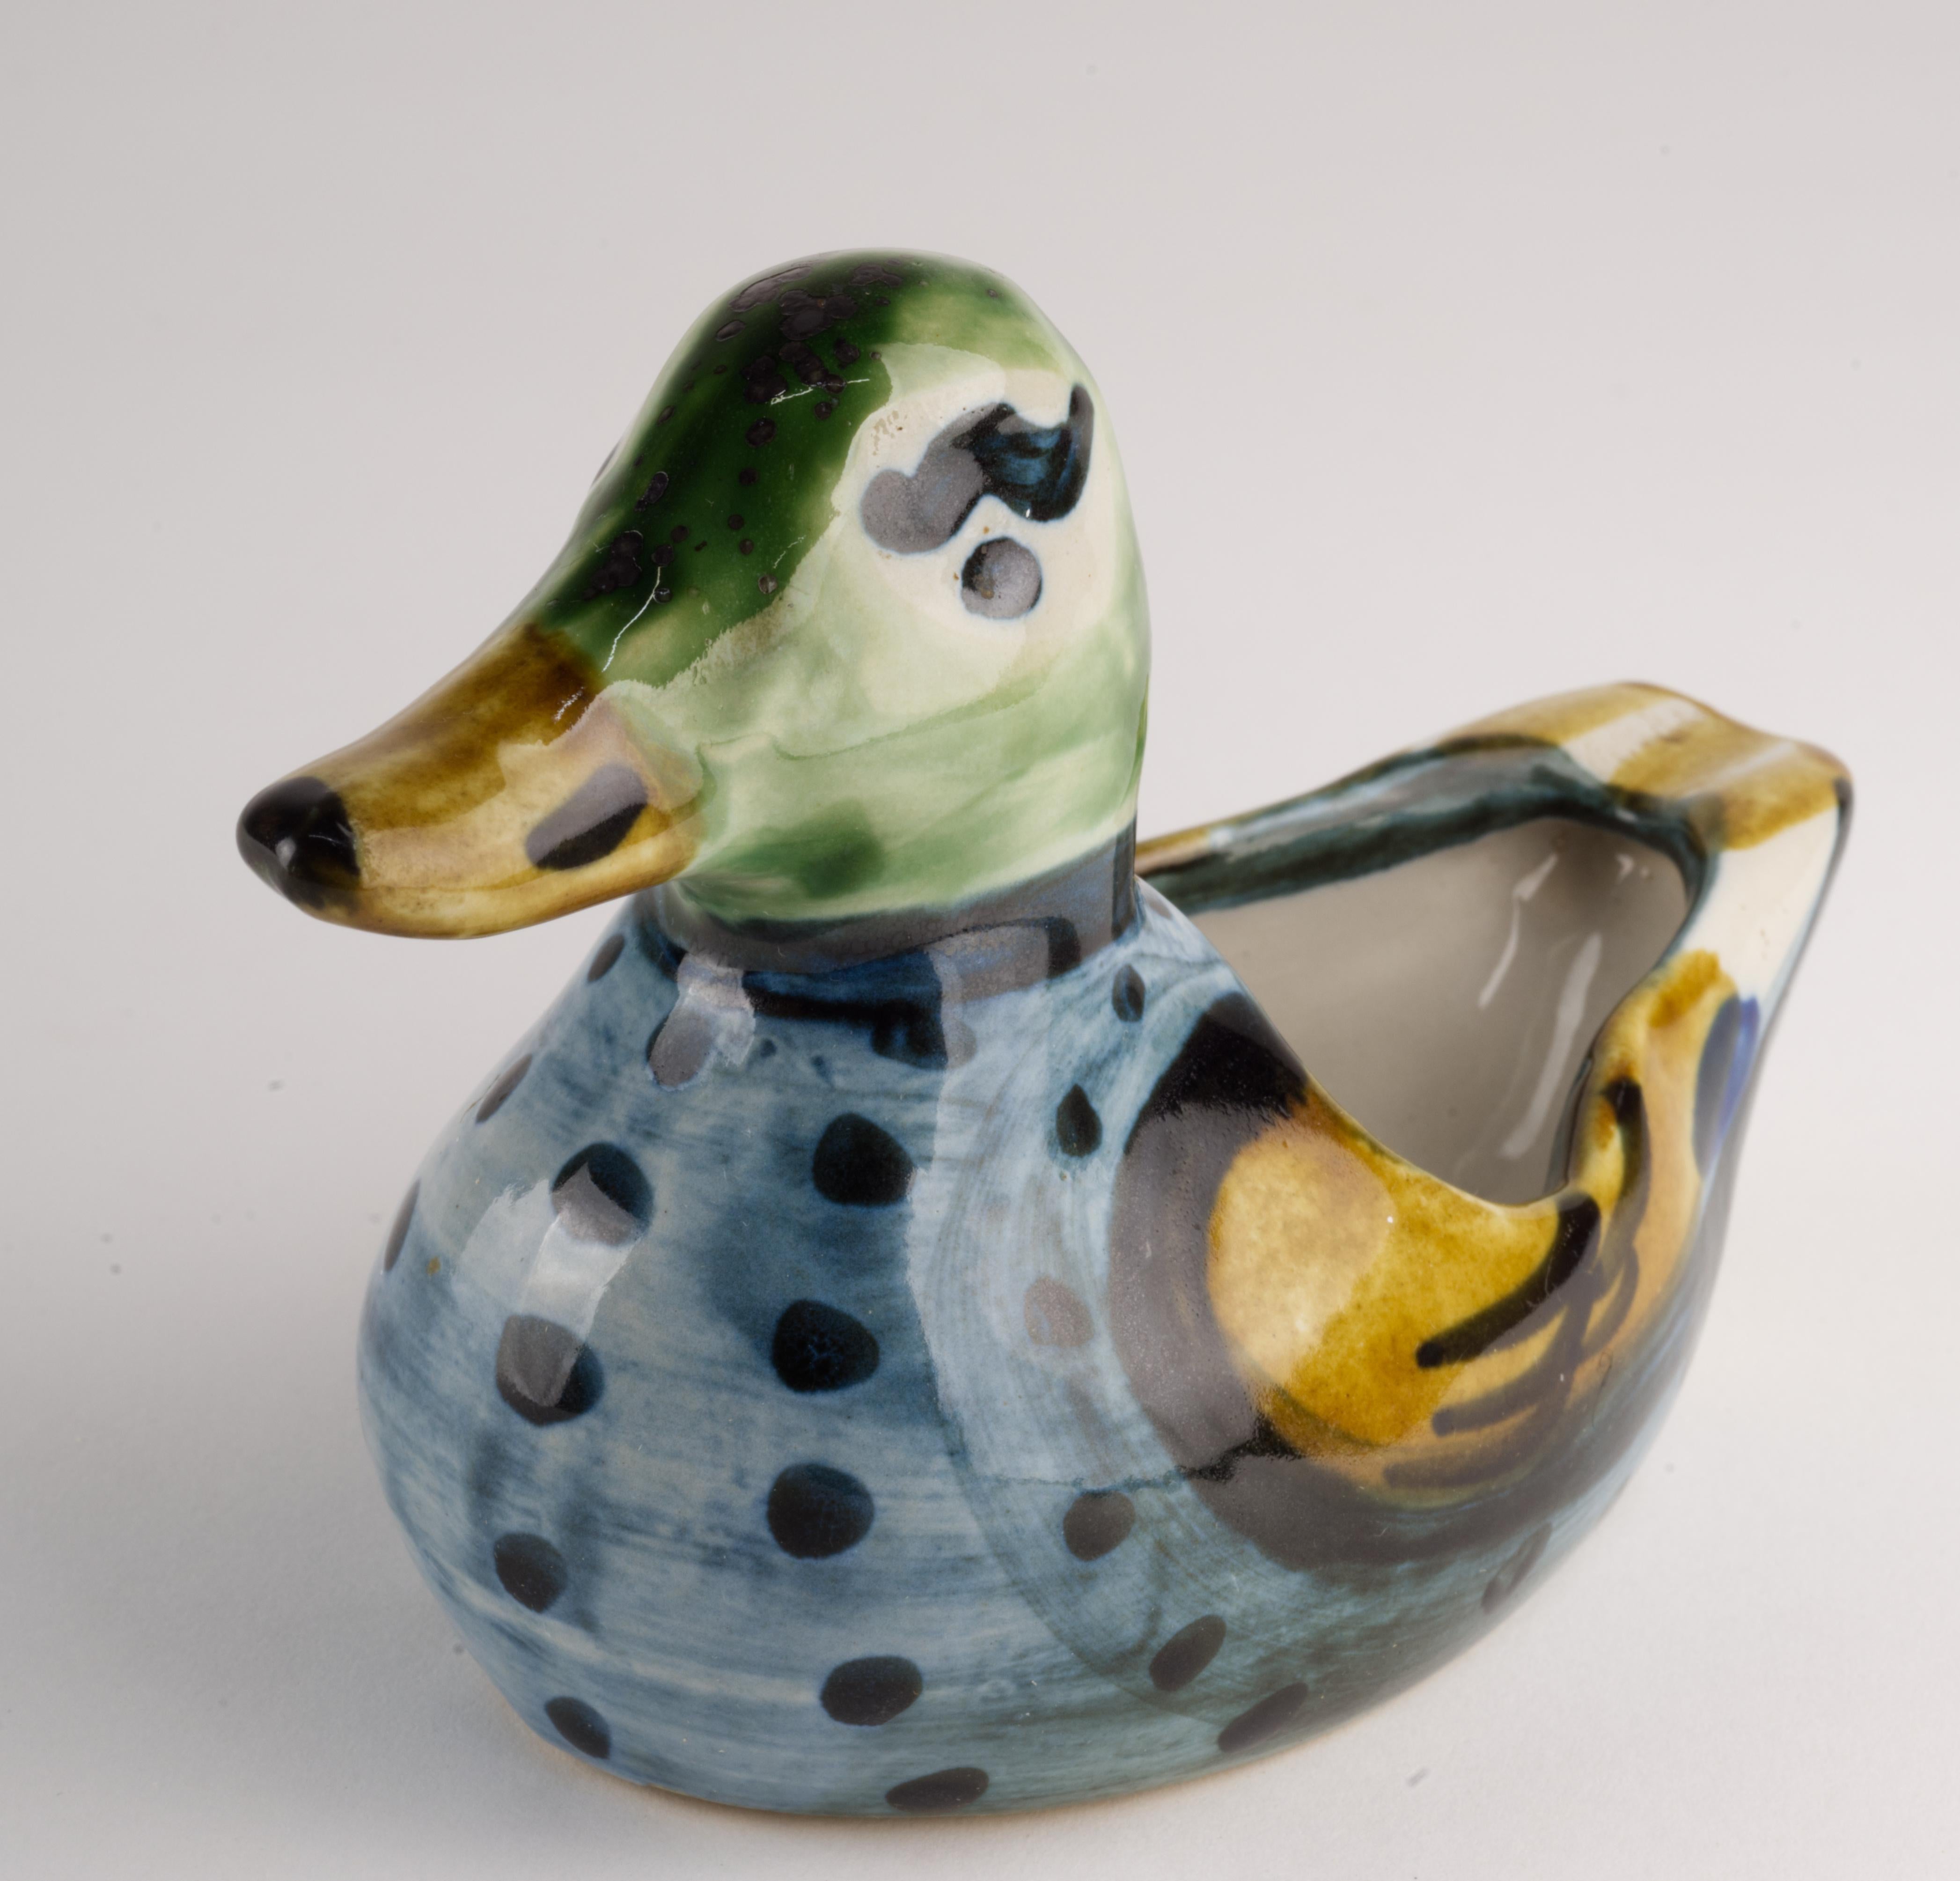 20th Century M.A. Hadley Pottery Hand Painted Duck Figurine Ashtray or Catchall